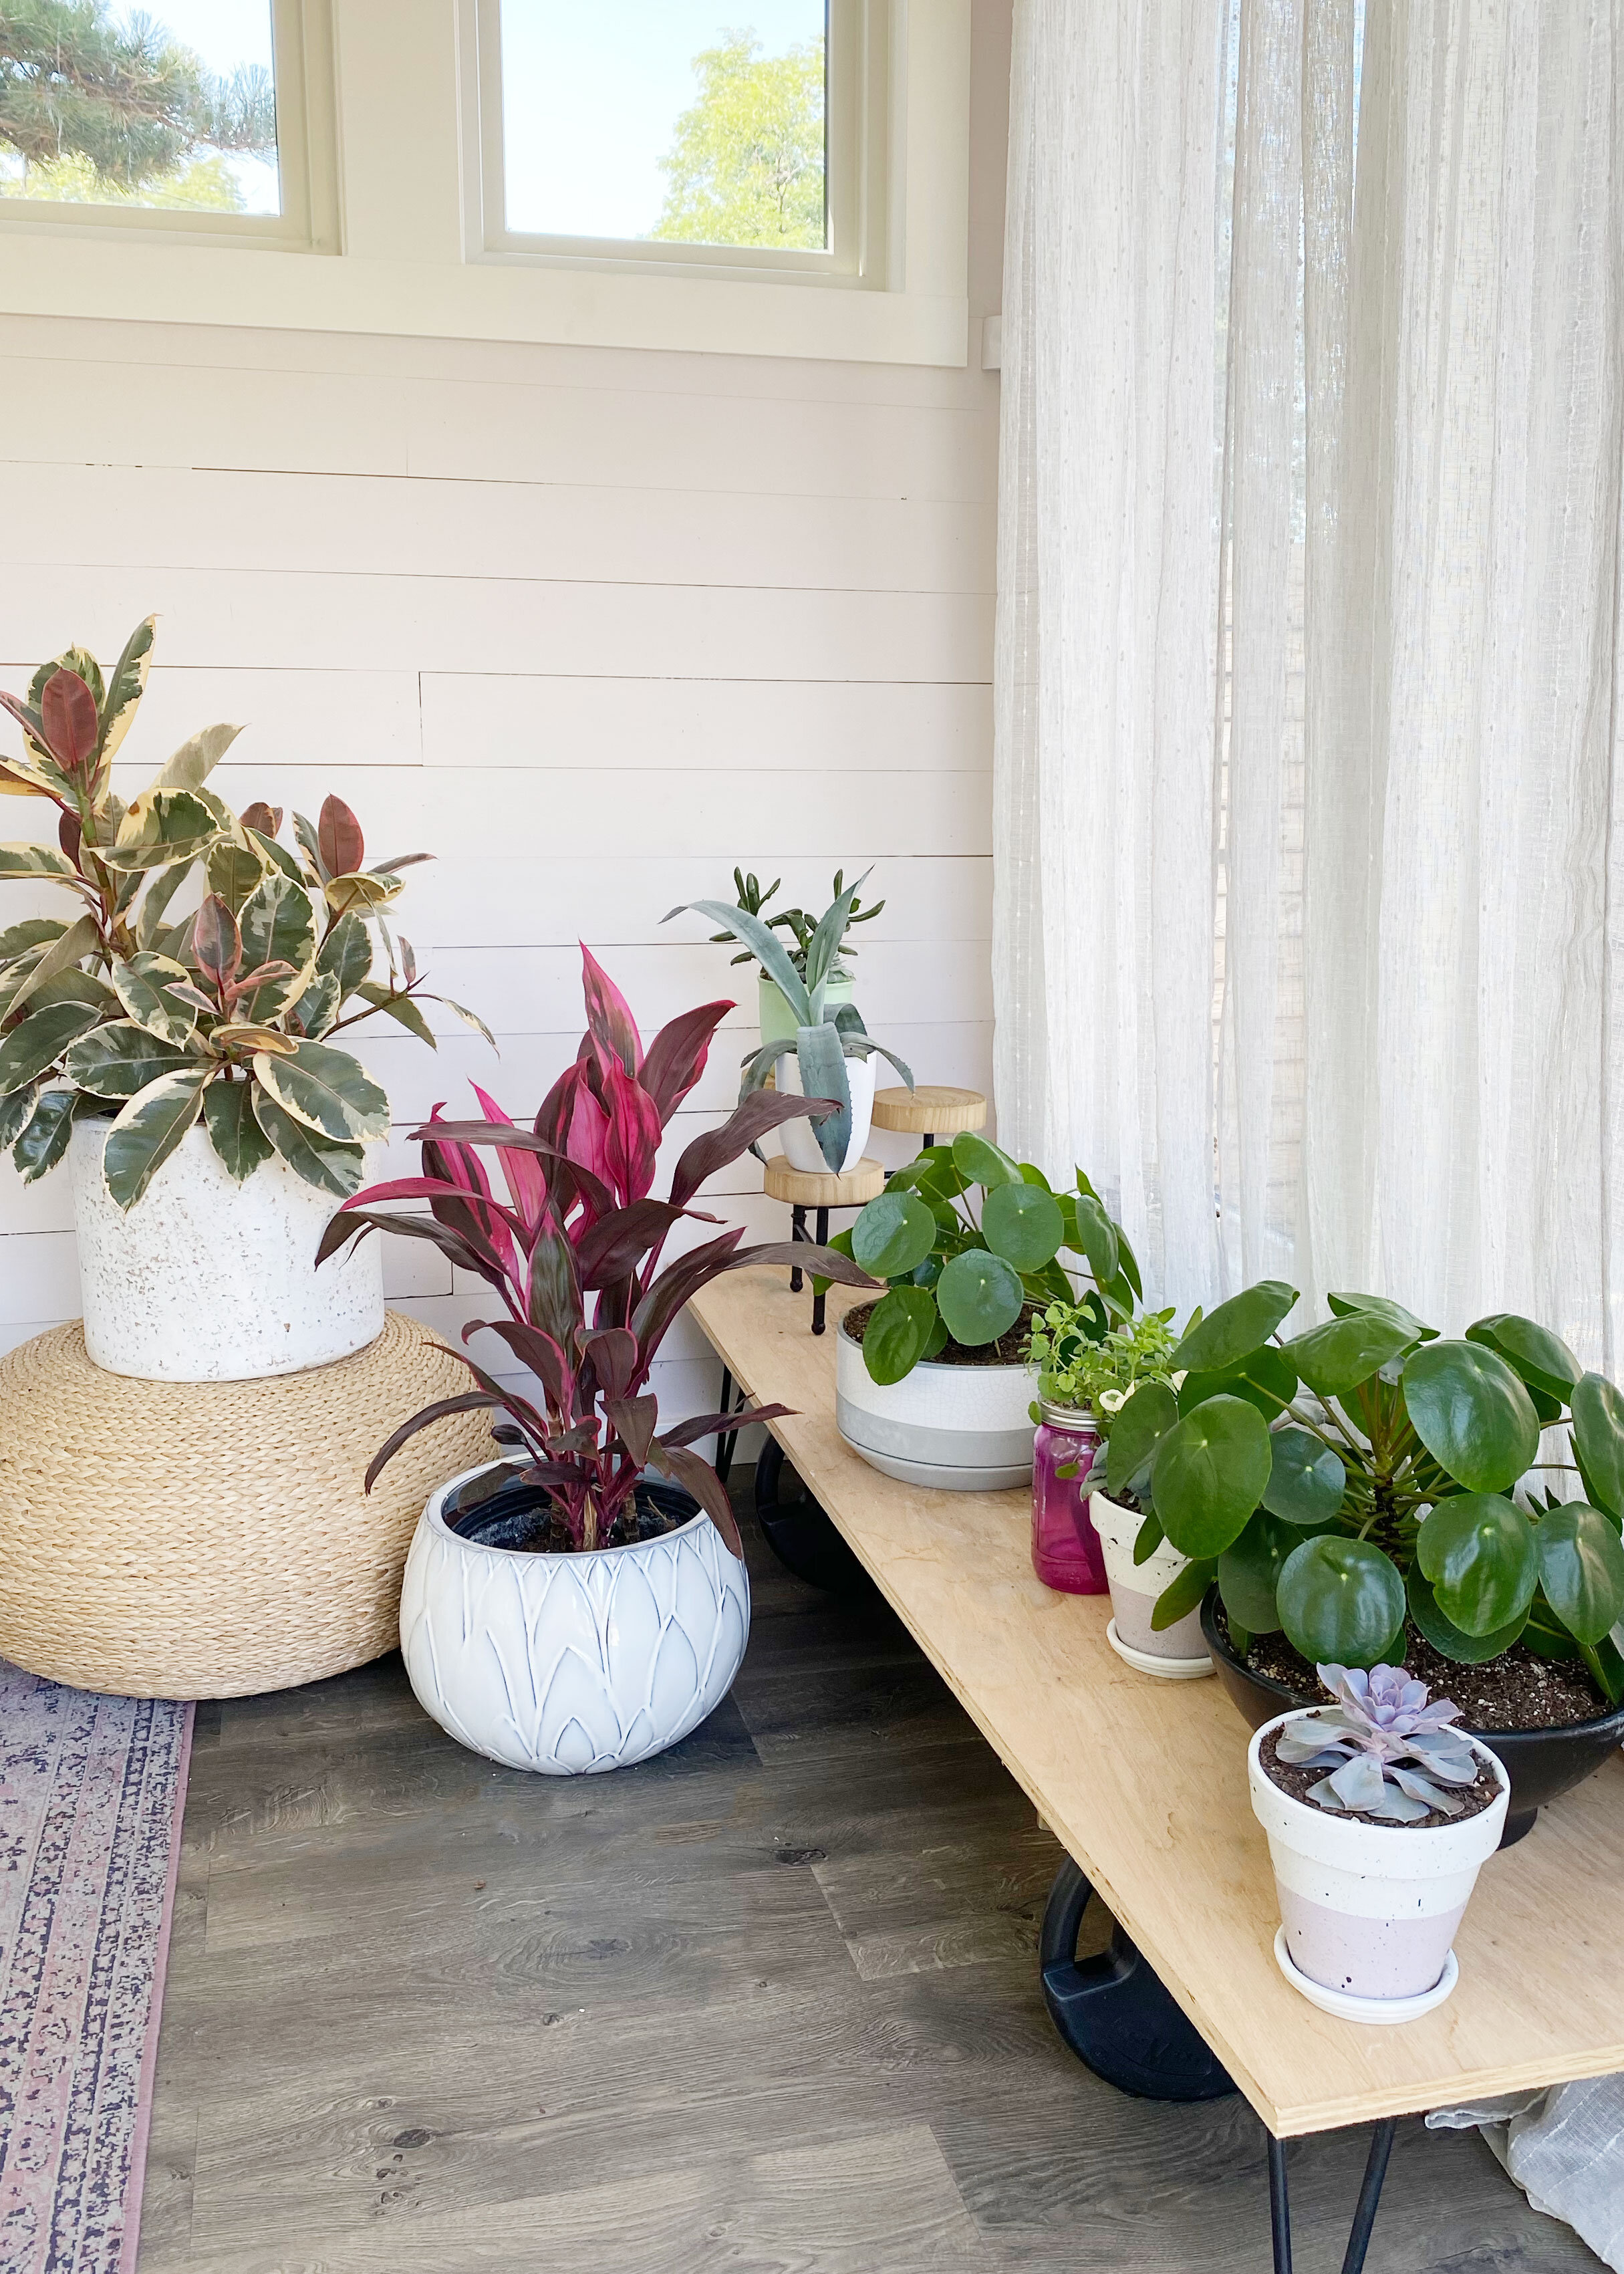  These are my sun-loving plants who chill in the long west-facing windows. I keep lots of tropicals and succulents here for sunbathing. Sweet loves! This color on my walls was one of the hardest decisions in this process! I fell in love with this col